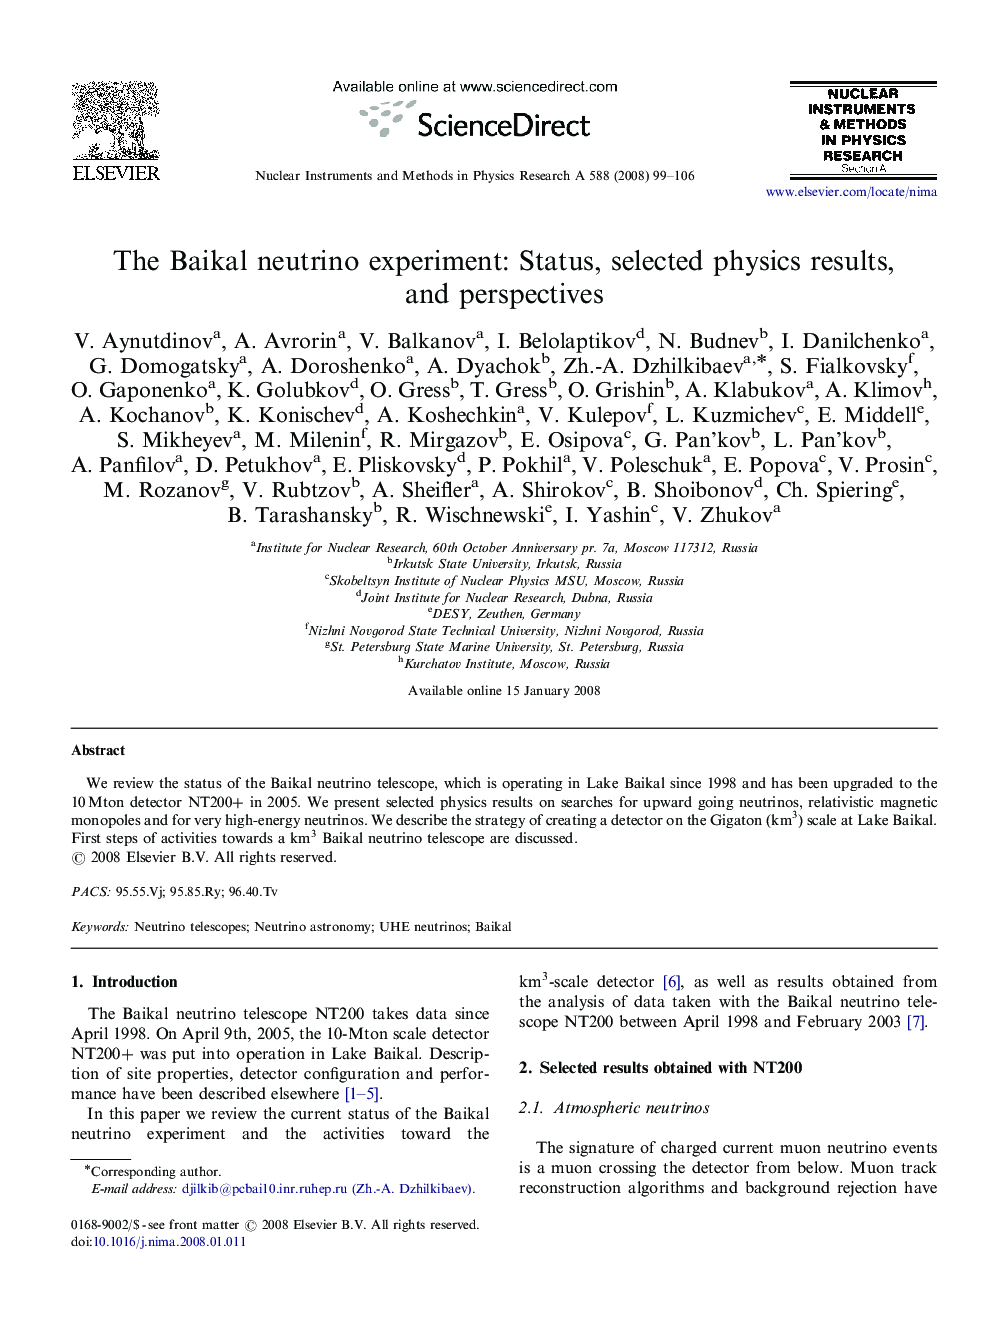 The Baikal neutrino experiment: Status, selected physics results, and perspectives